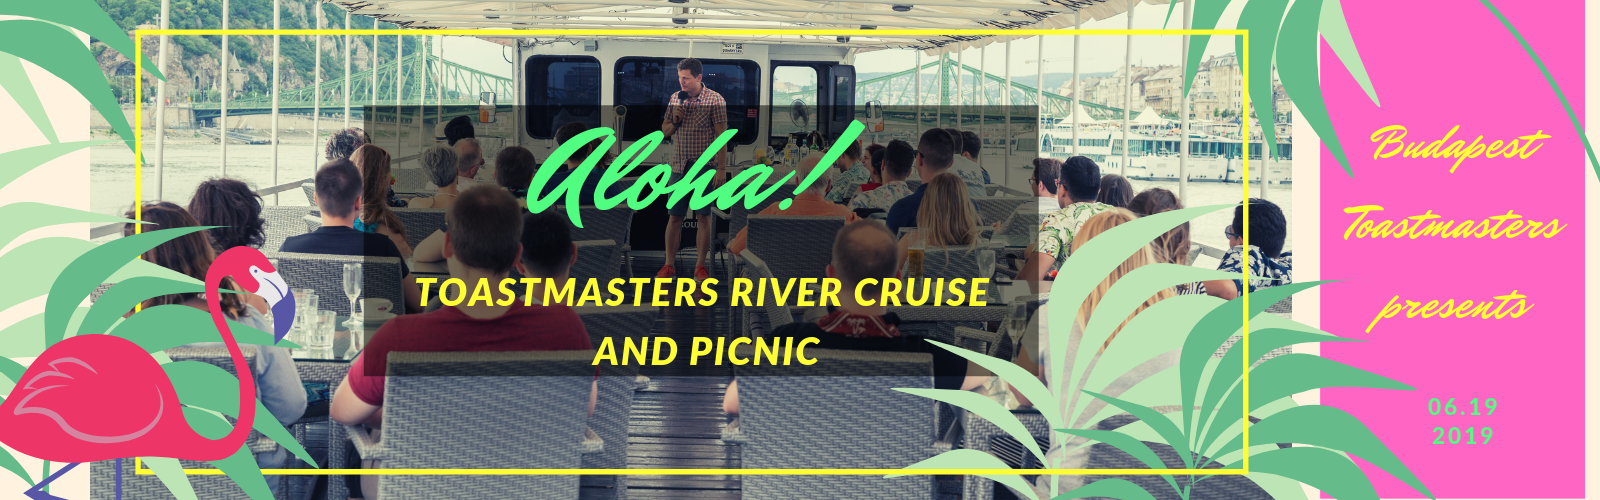 You are currently viewing Aloha! Toastmasters River Cruise and Picnic